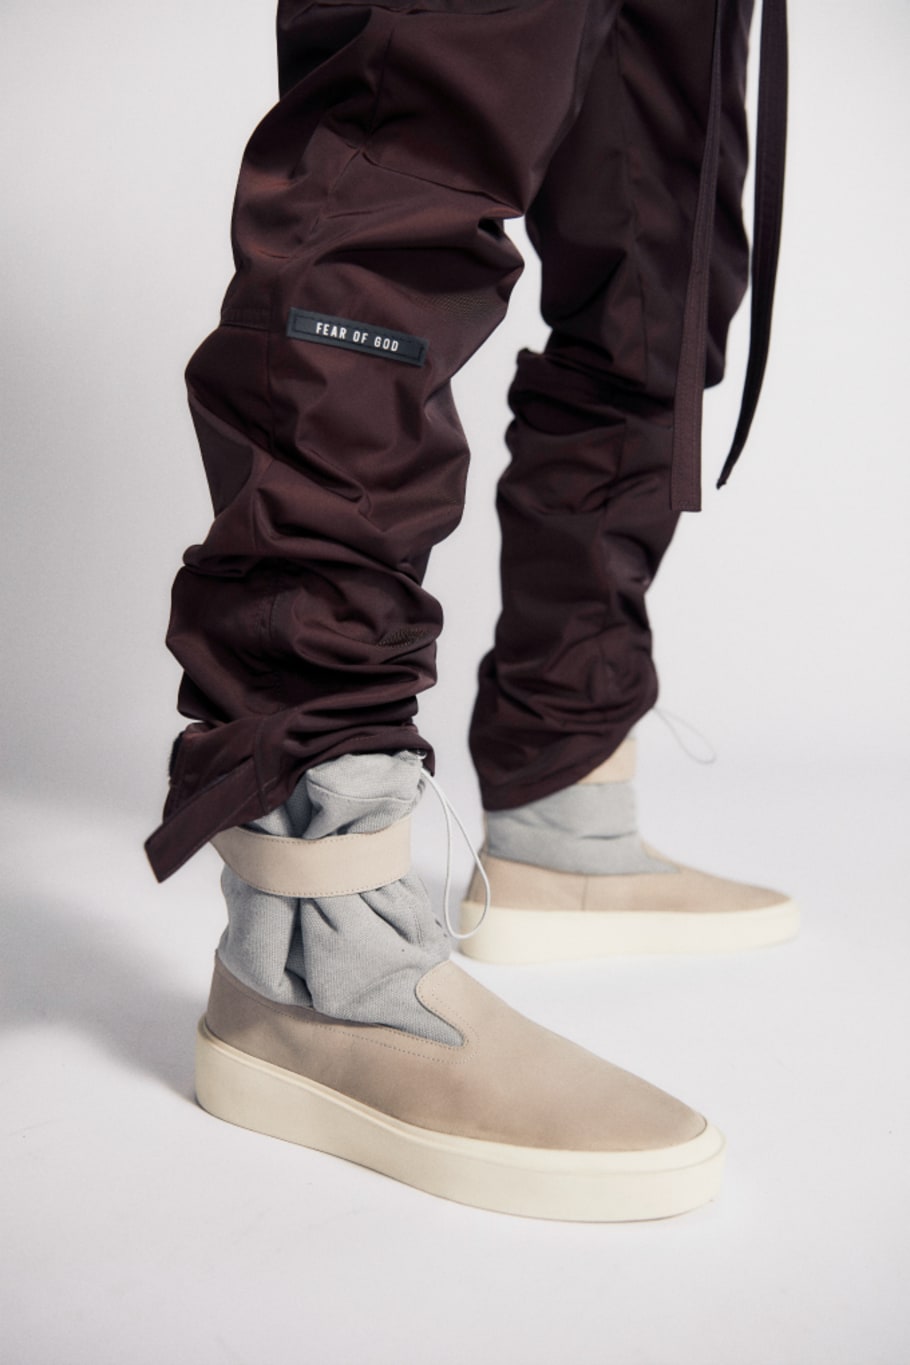 FEAR OF GOD sixth collection pants